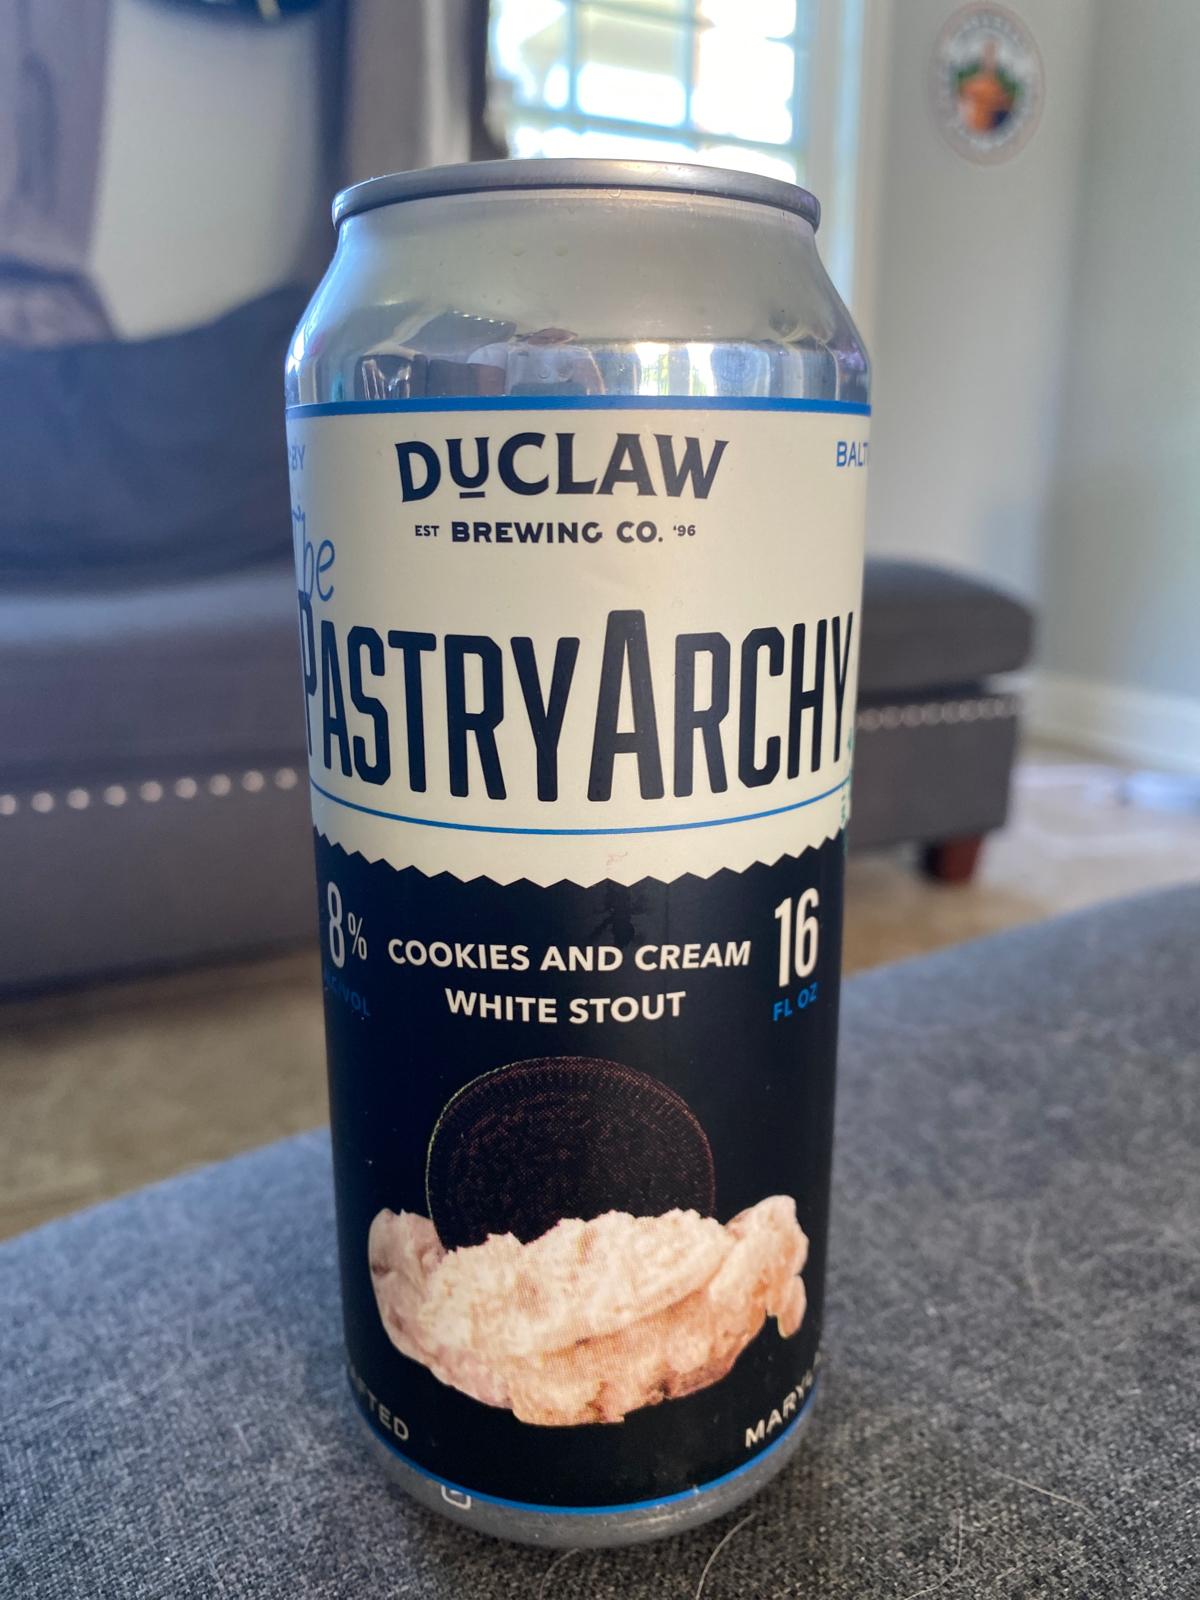 The PastryArchy: Cookies And Cream White Stout